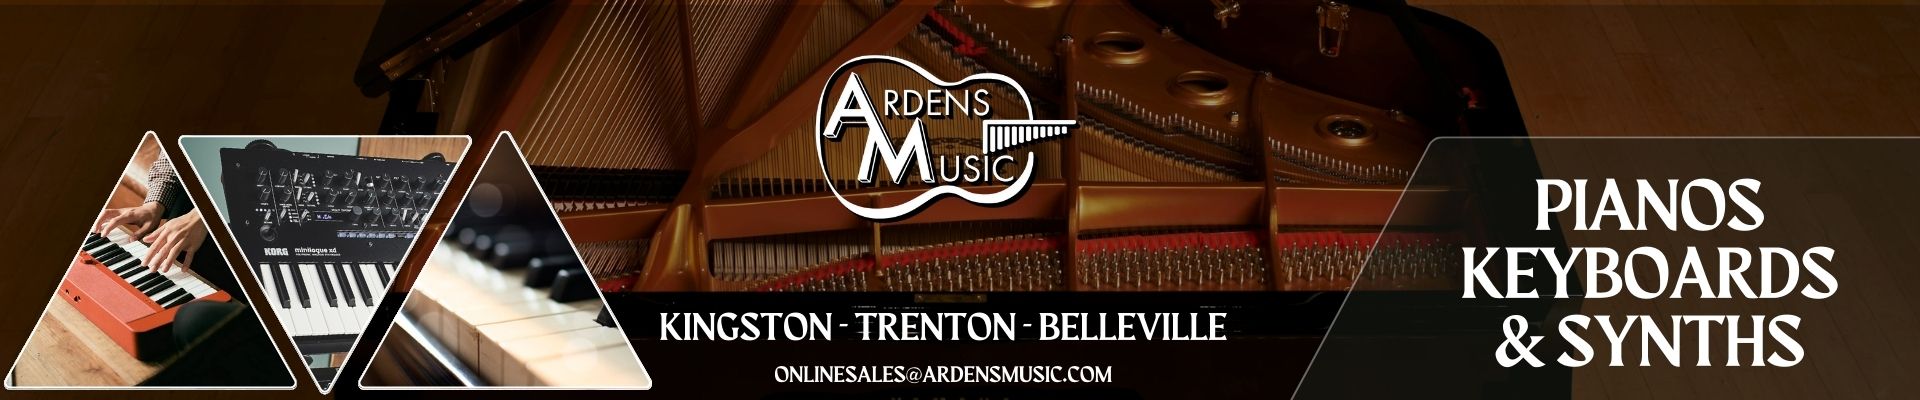 Choose Ardens Music for all your Piano, Keyboard, and Synth needs. Our extensive selection and wide range of accompanying accessories make us the perfect one-stop shop. Visit your nearest Ardens Music location today to see for yourself!